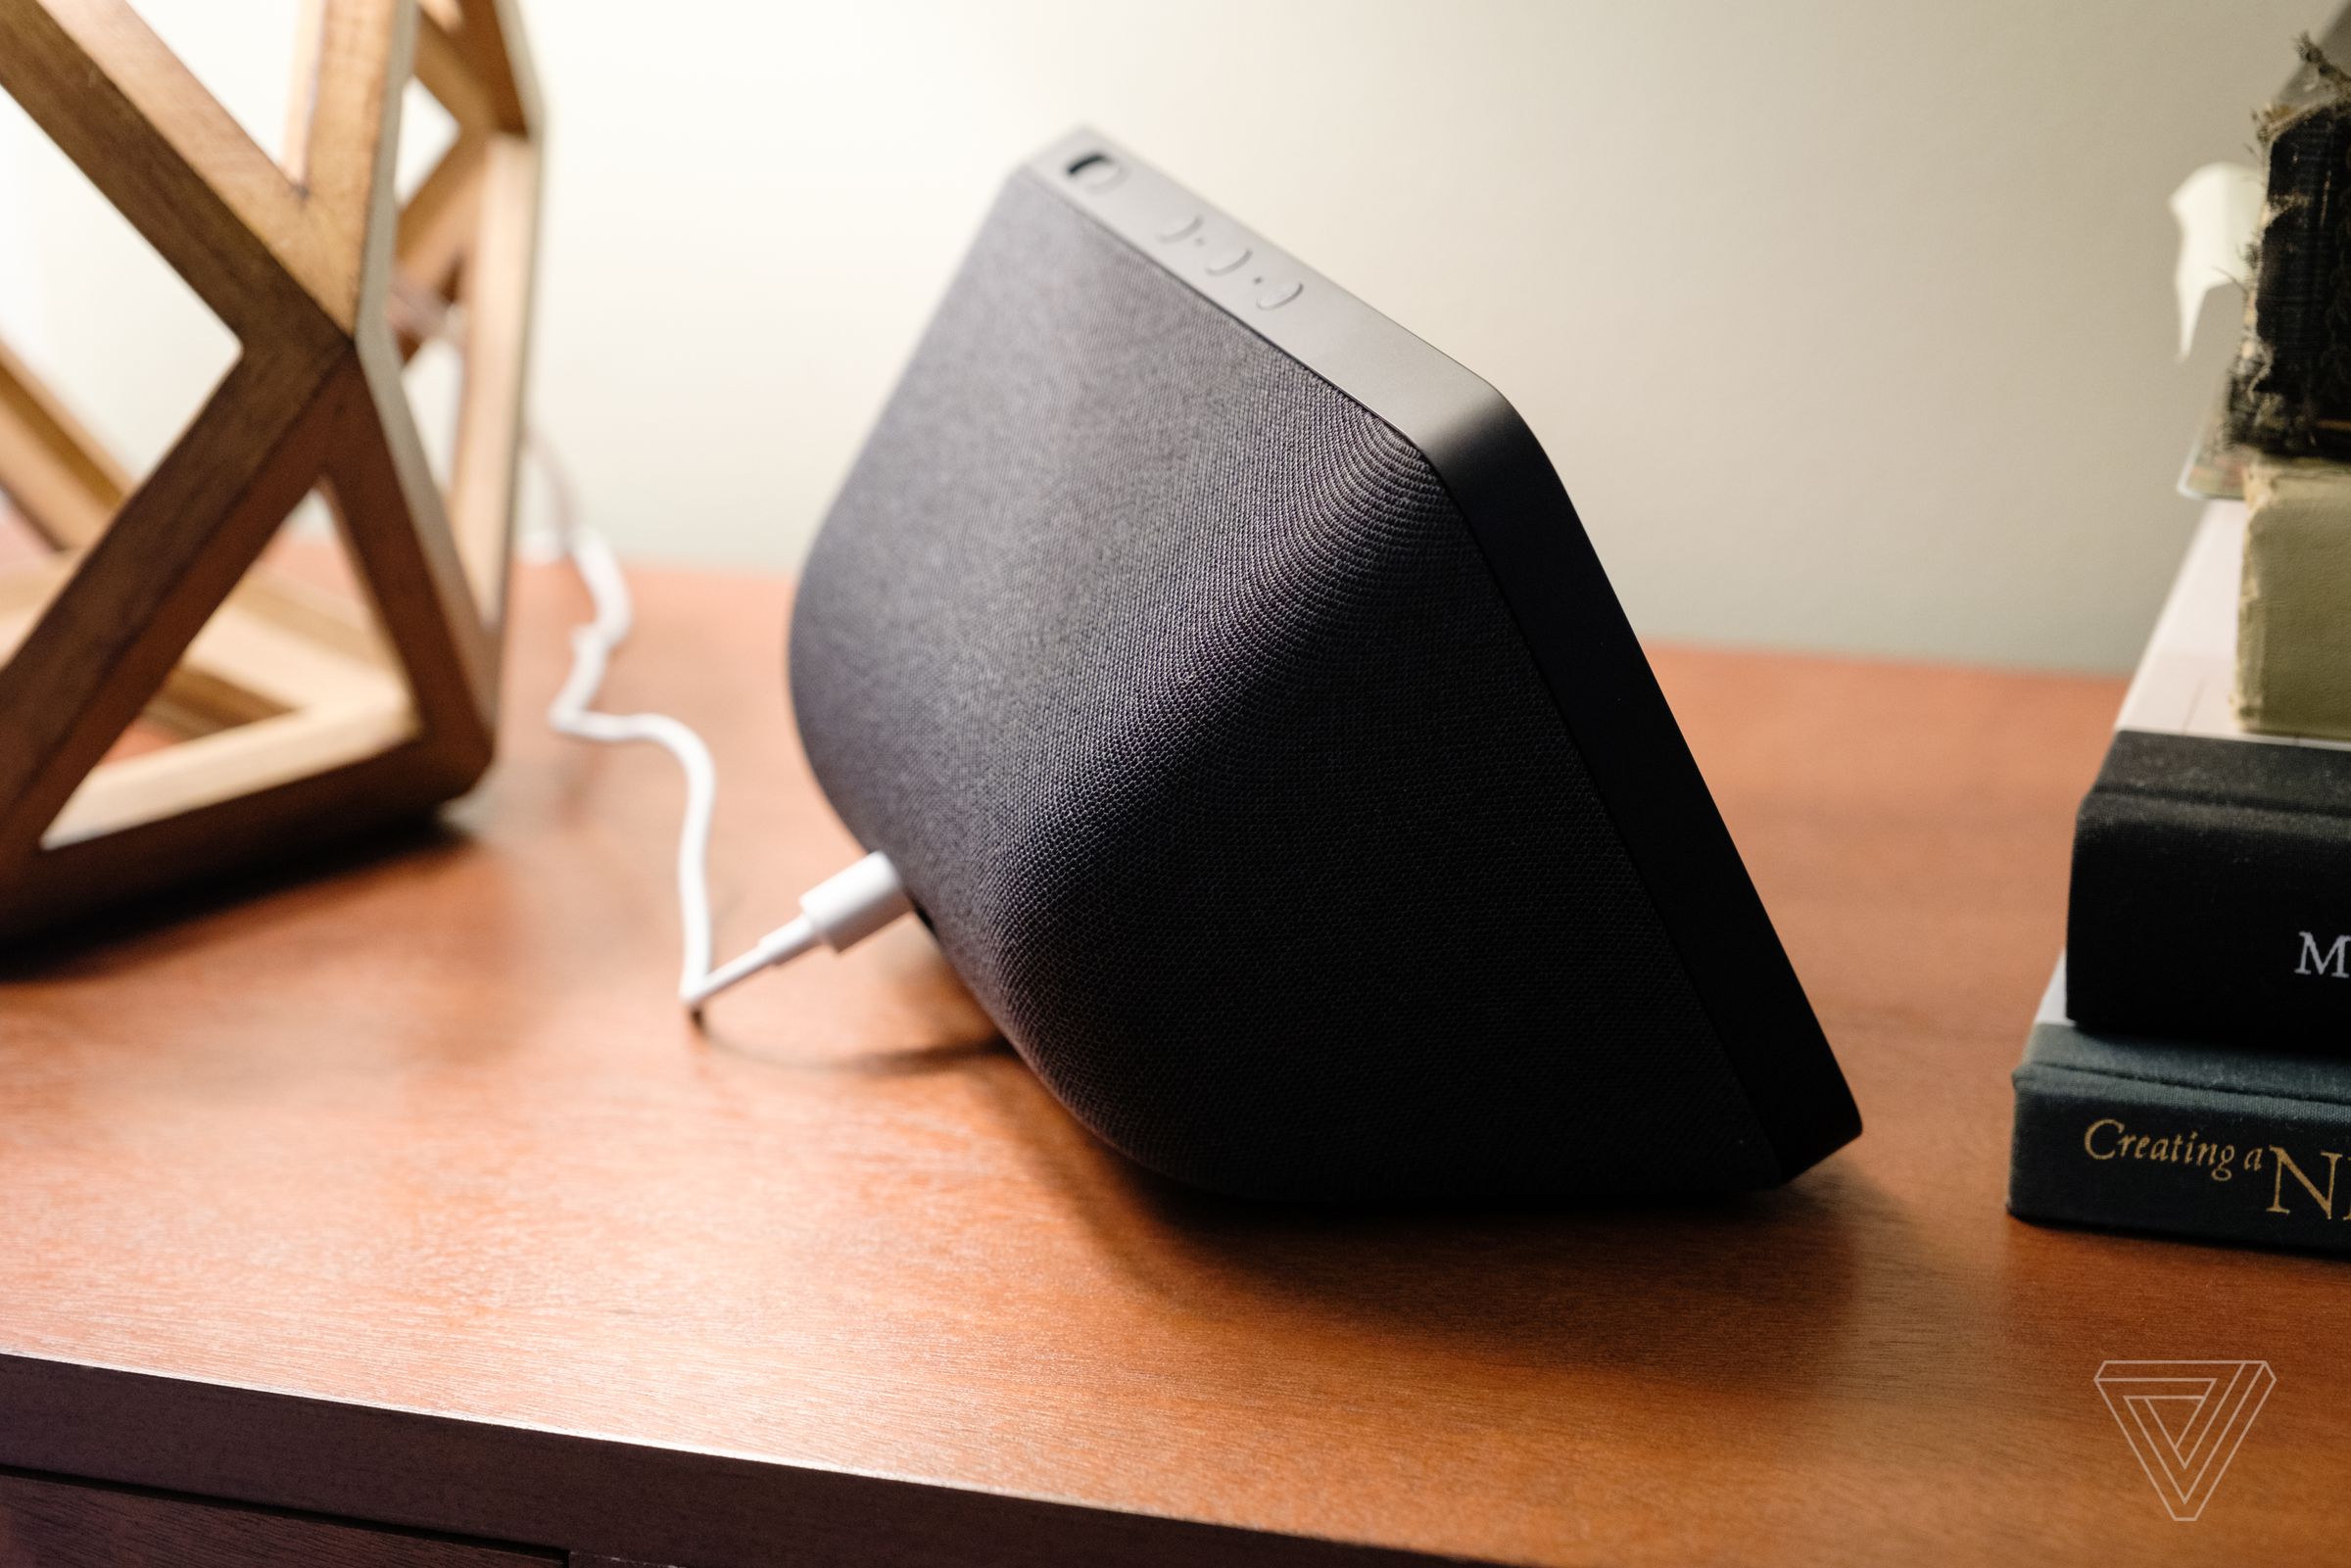 The wedge-shaped design houses two speaker drivers that put out impressive volume for its size.